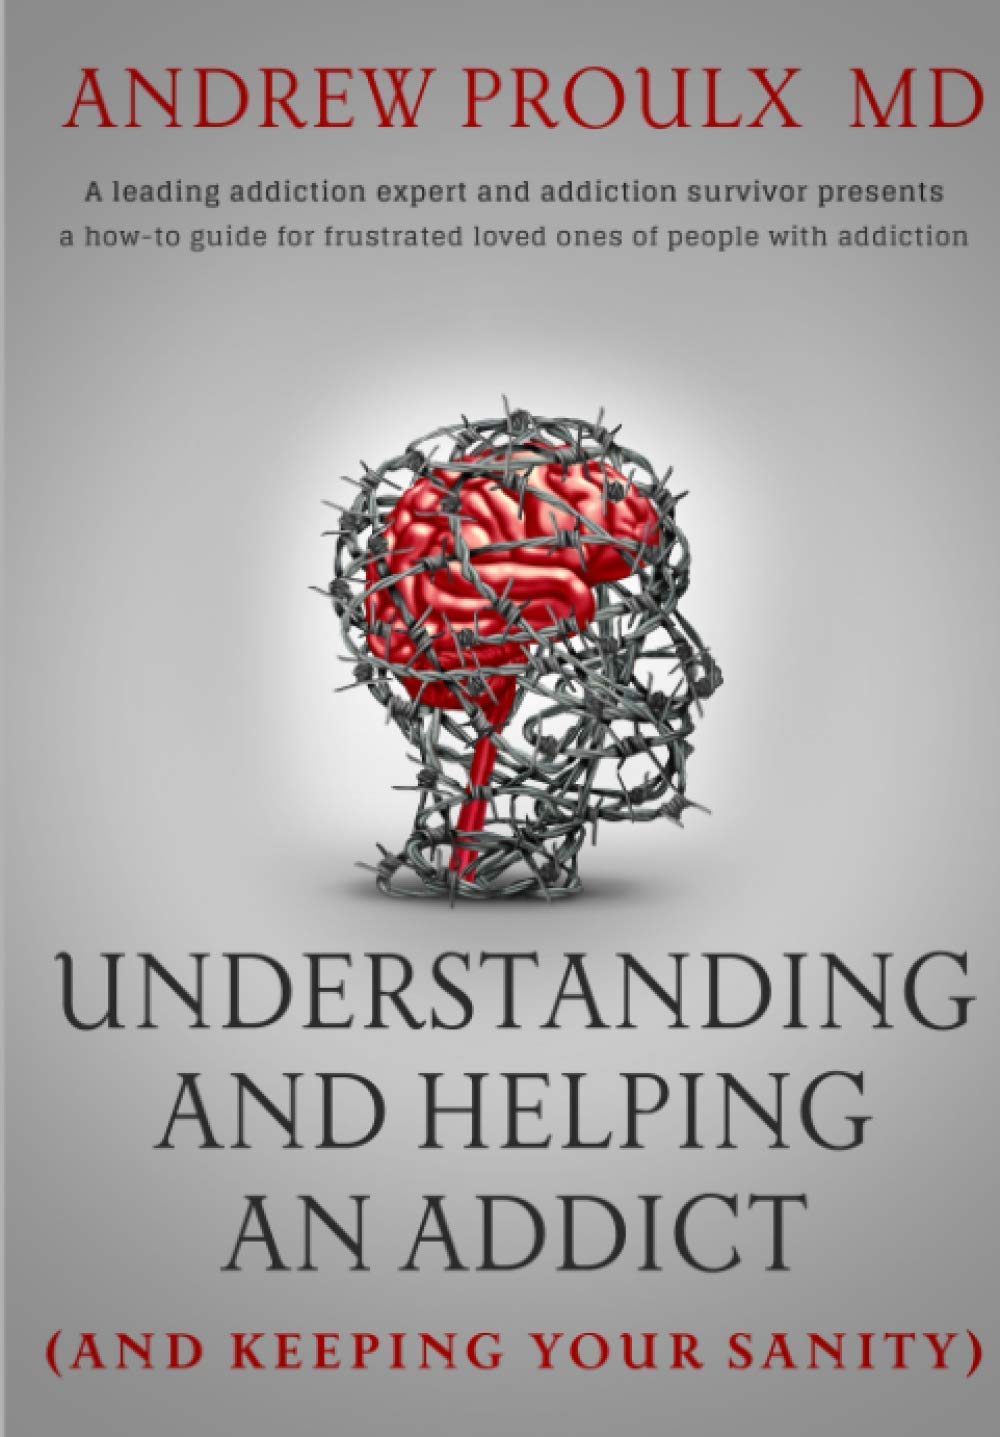 Understanding and Helping an Addict by Andrew Proulx, MD